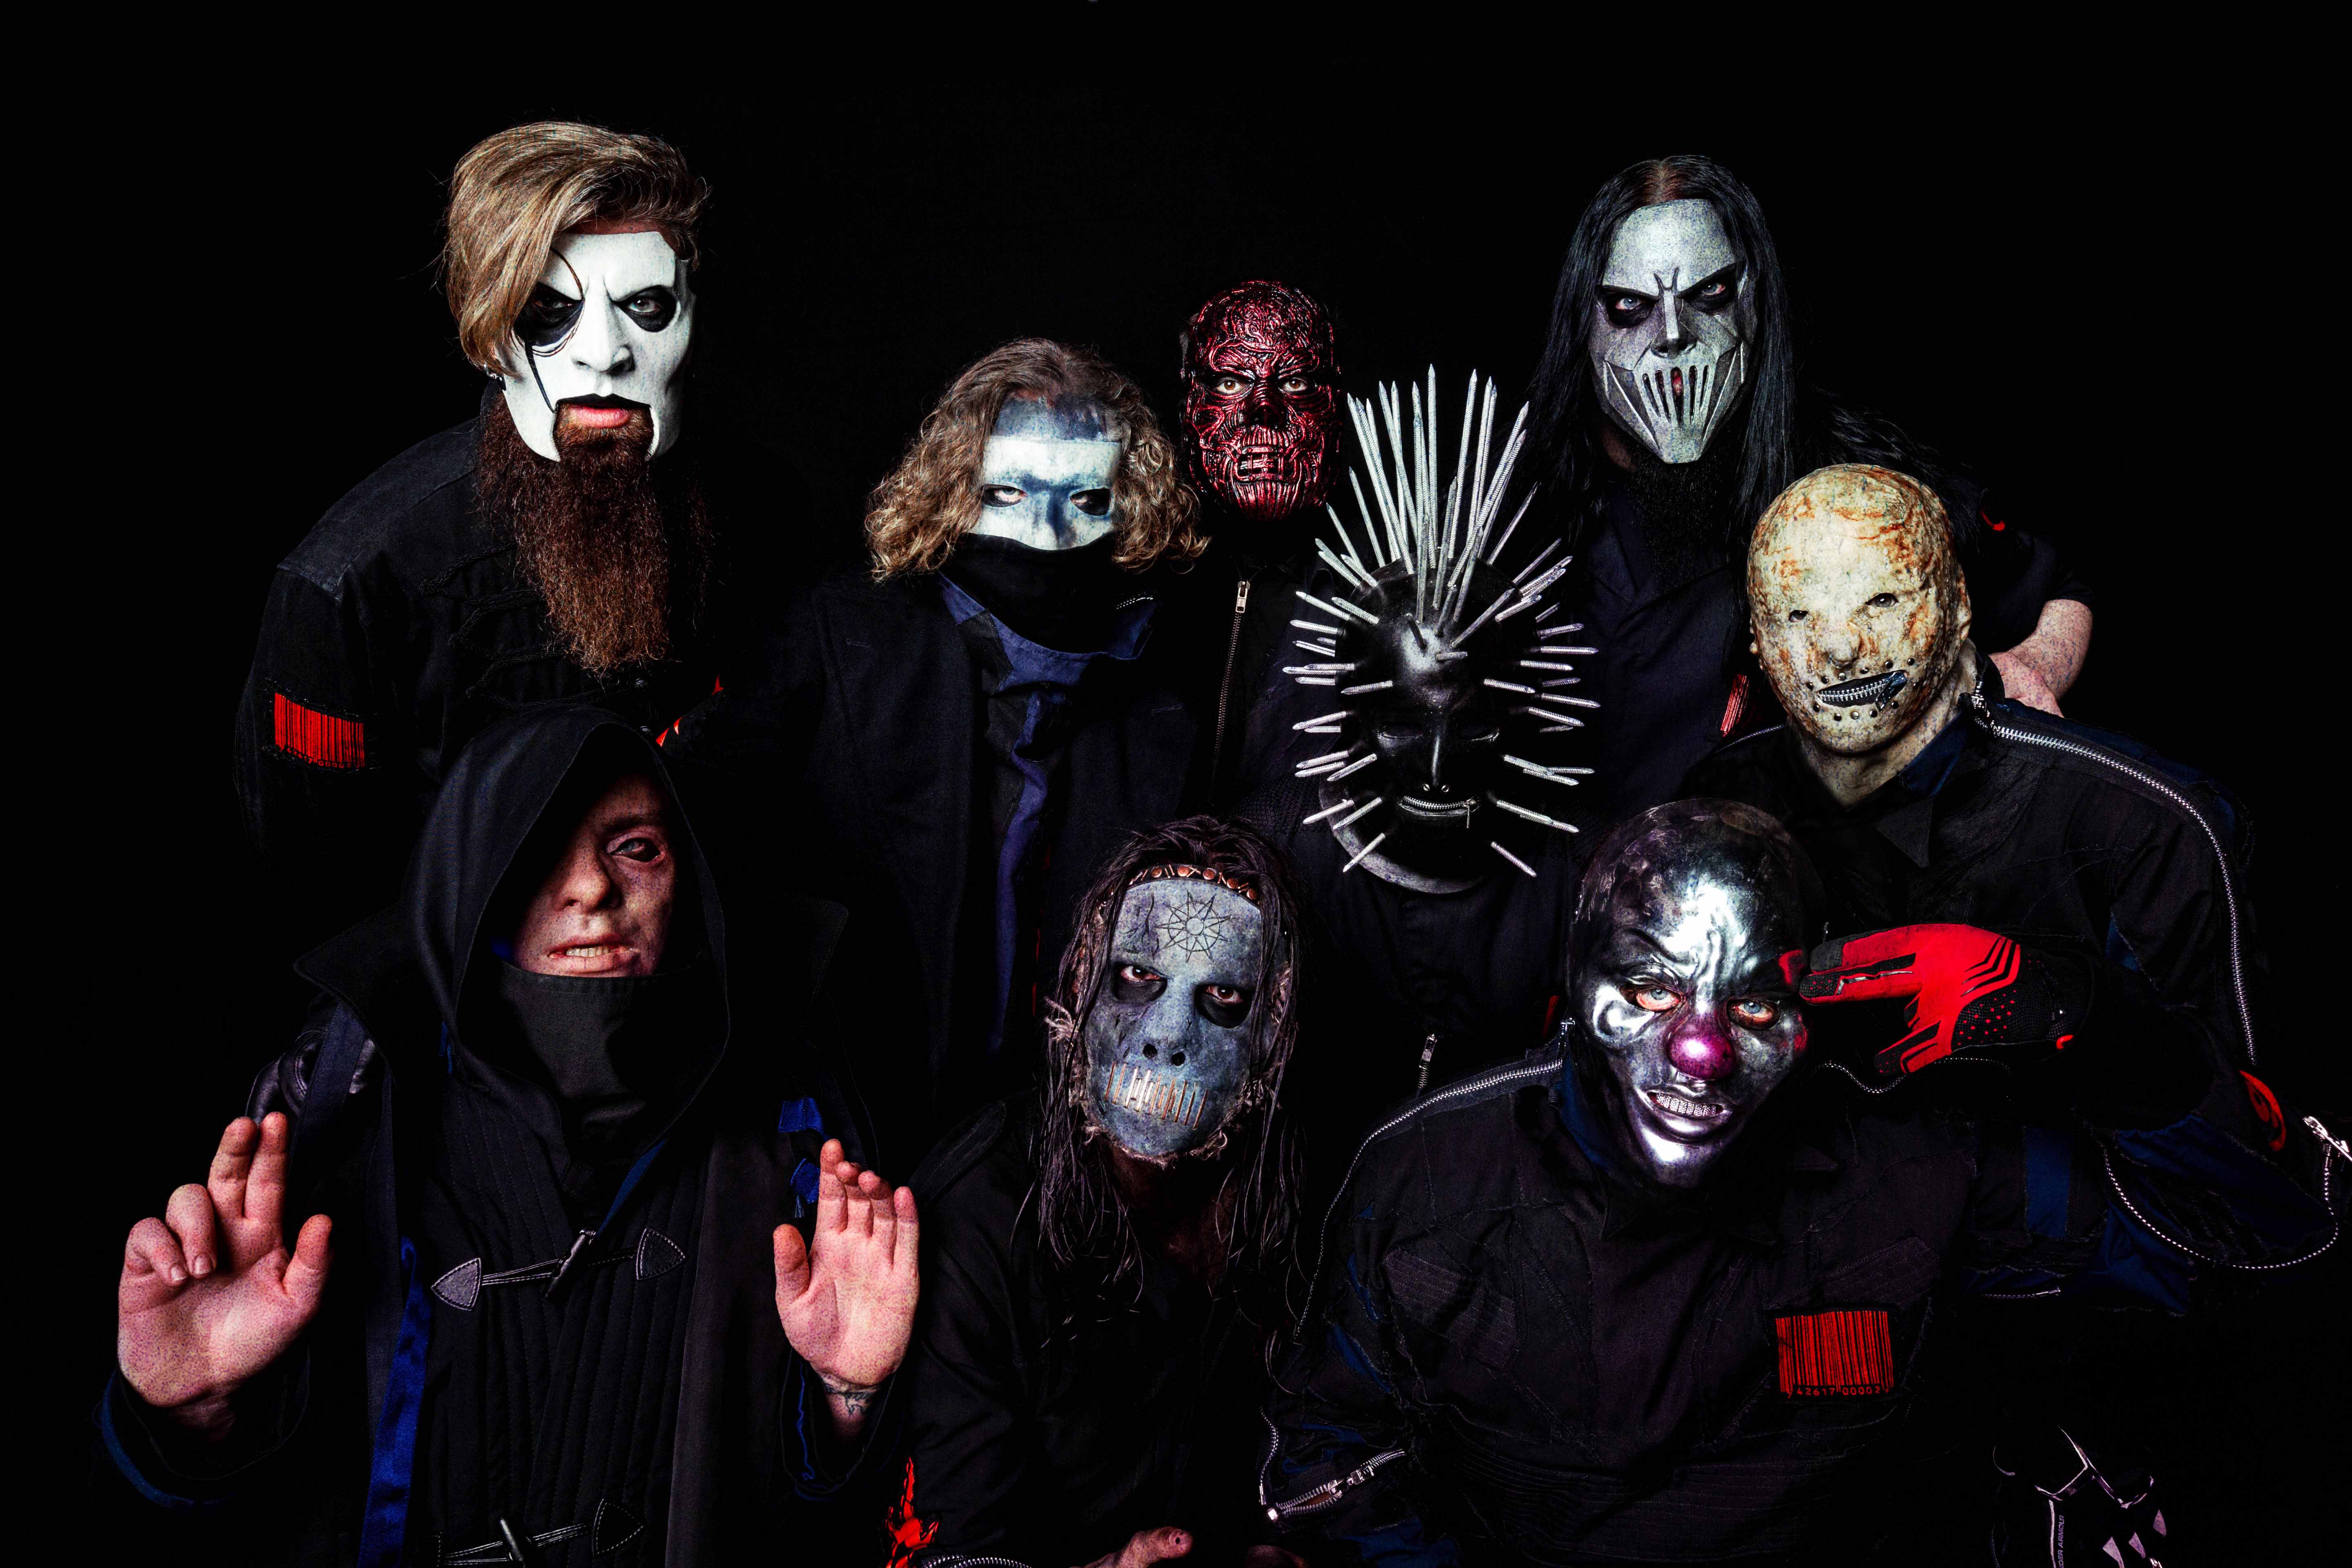 Flipboard Slipknot Play First Full Show in Almost Three Years See Set